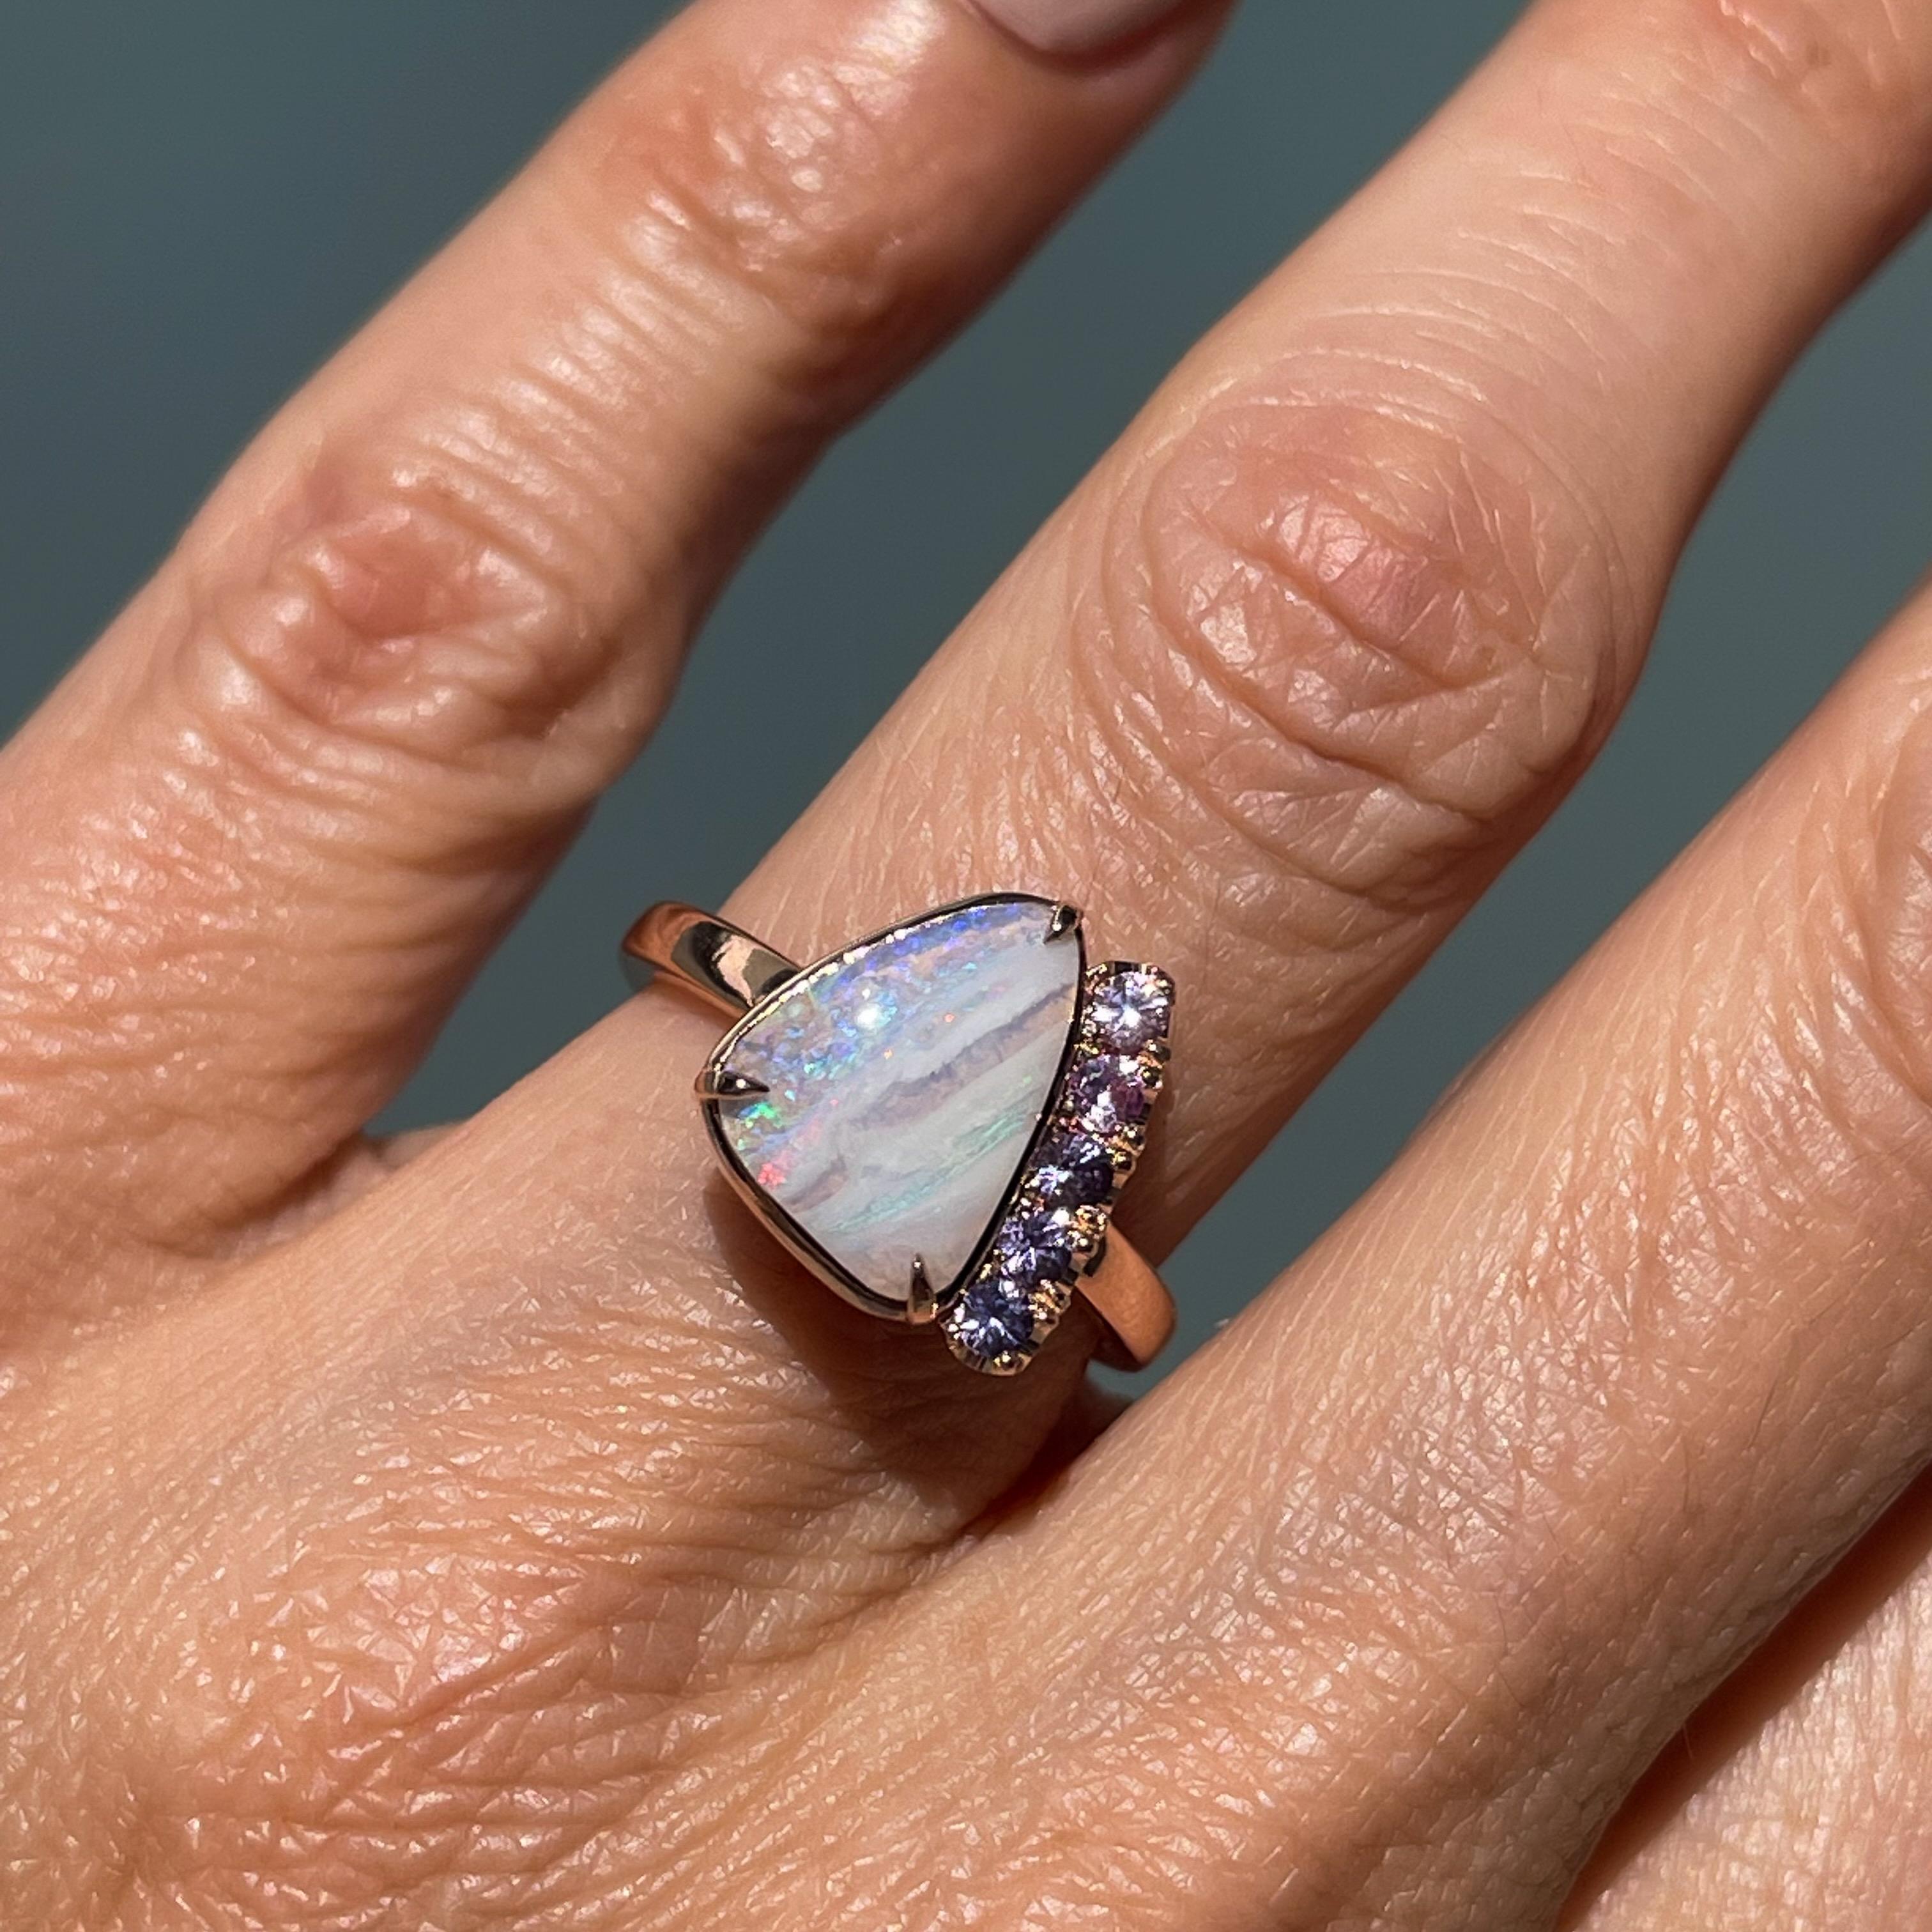 Women's Traces of Love Australian Opal Engagement Ring in Rose Gold by NIXIN Jewelry For Sale